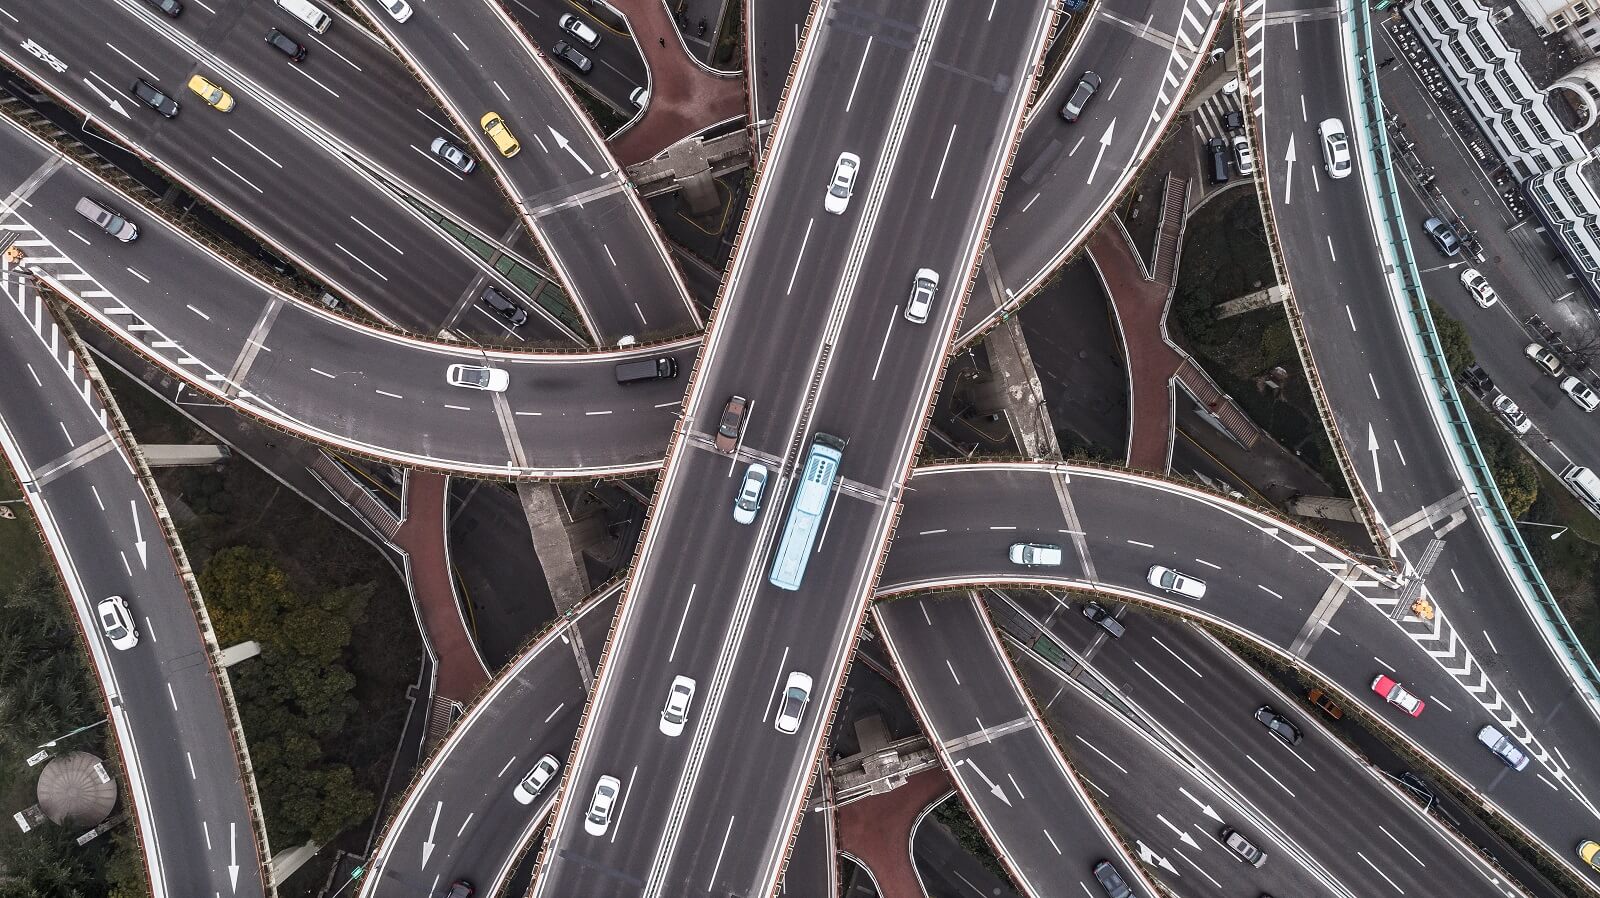 Complicated highway interchange denotes the many possible paths